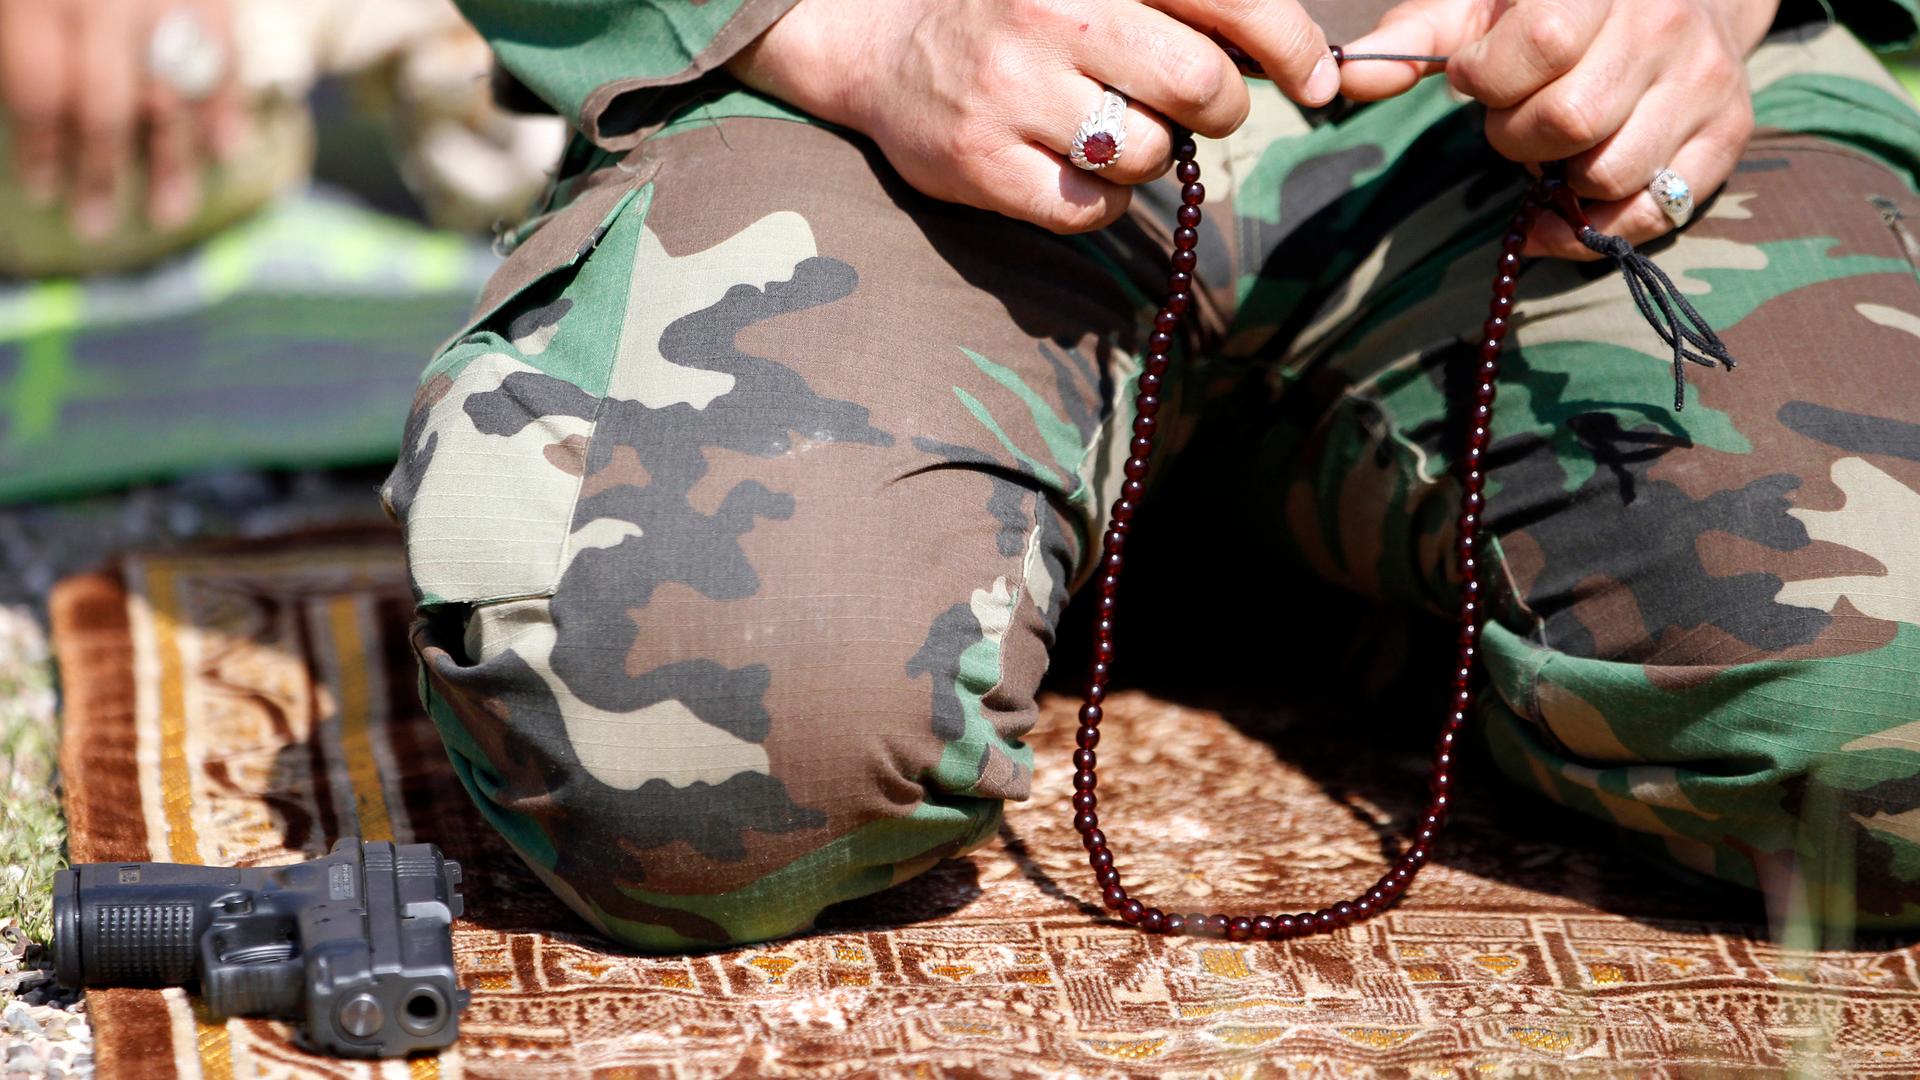 A Shi’ite militiaman praying before the battle for Tikrit commenced on March 1, 2015.